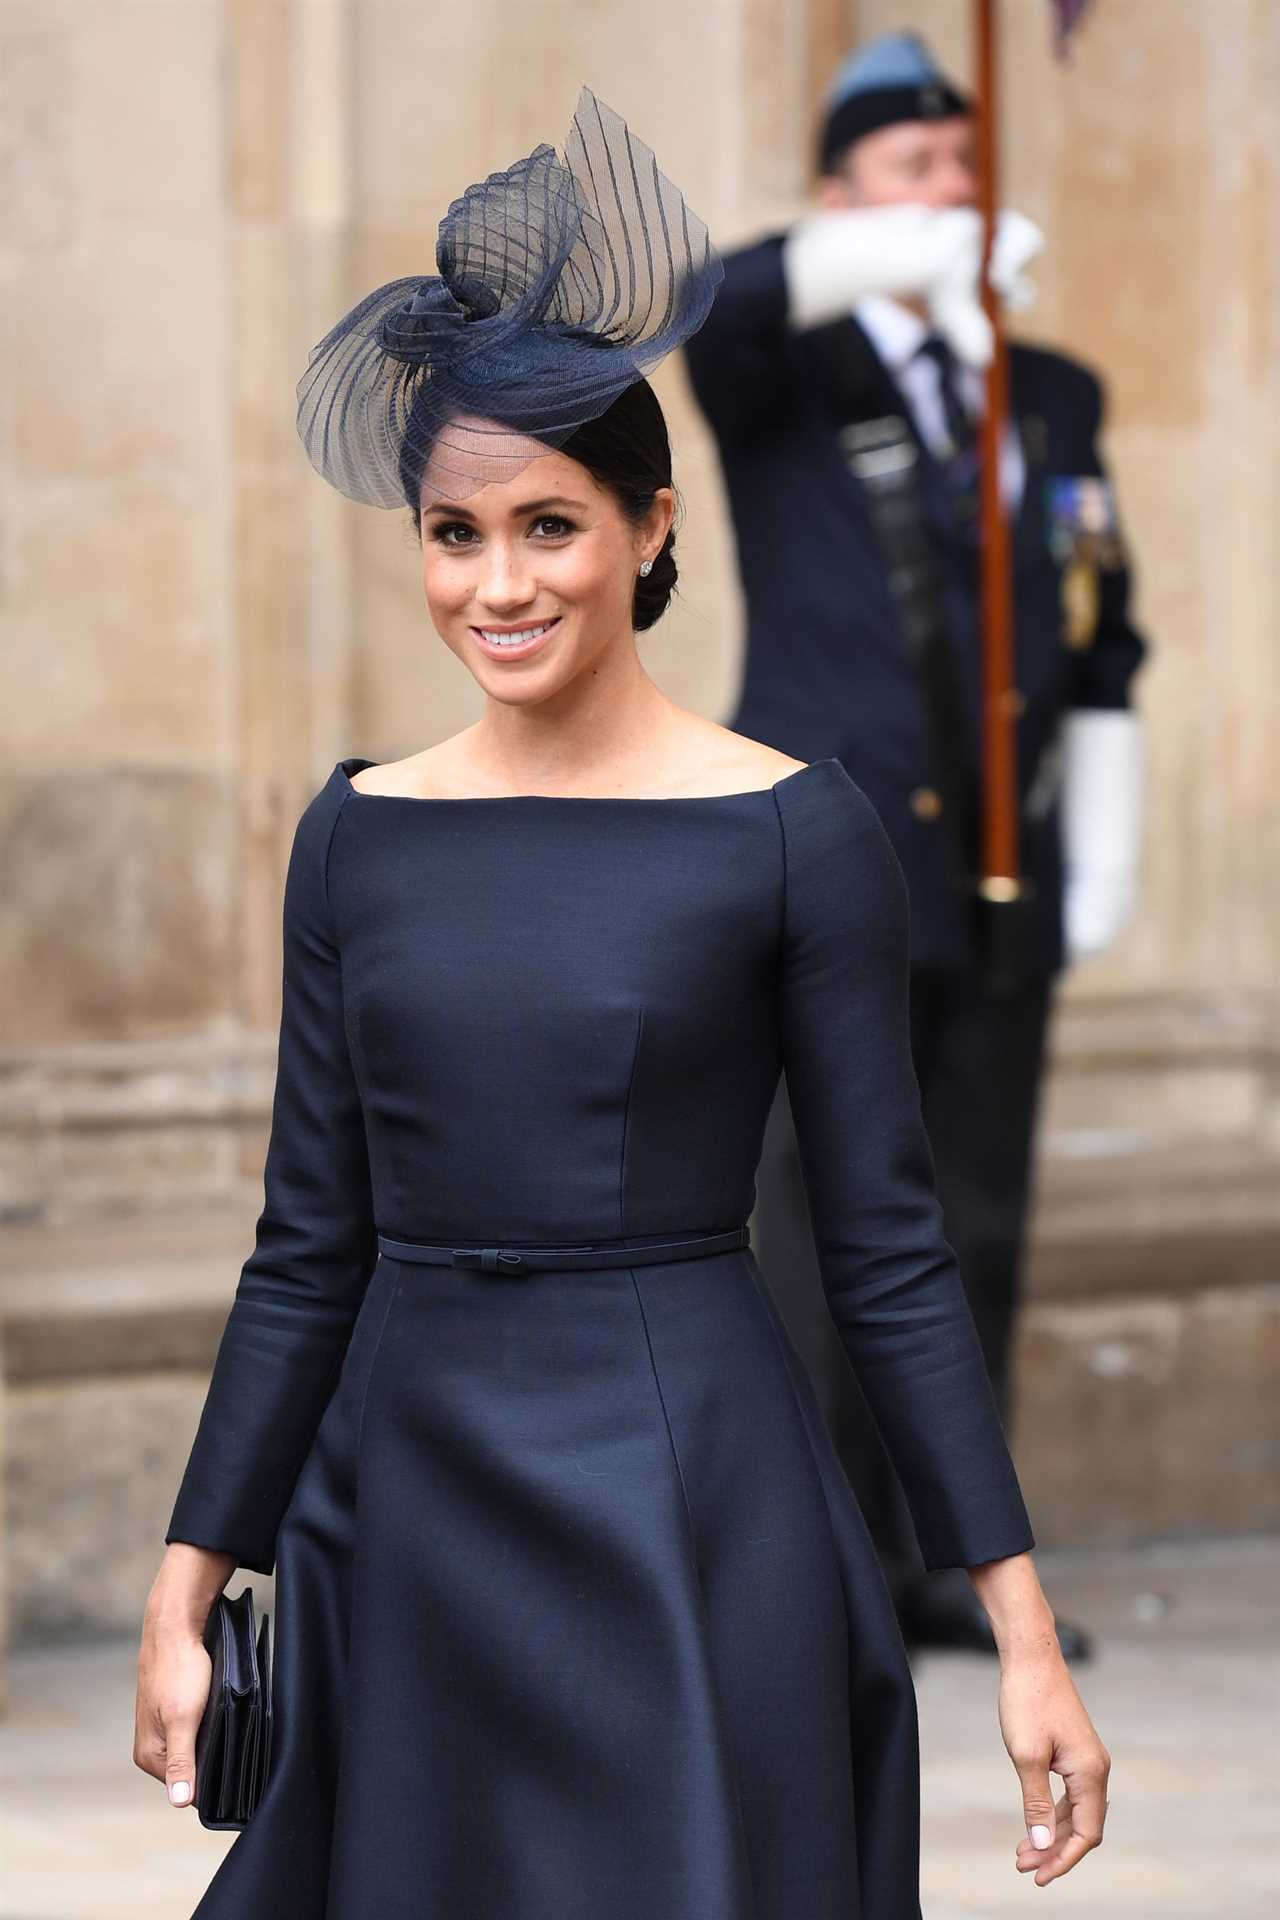 Meghan Markle on track to be become face of Dior after branded as ‘f****** grifters’ by Spotify chief as podcast axed